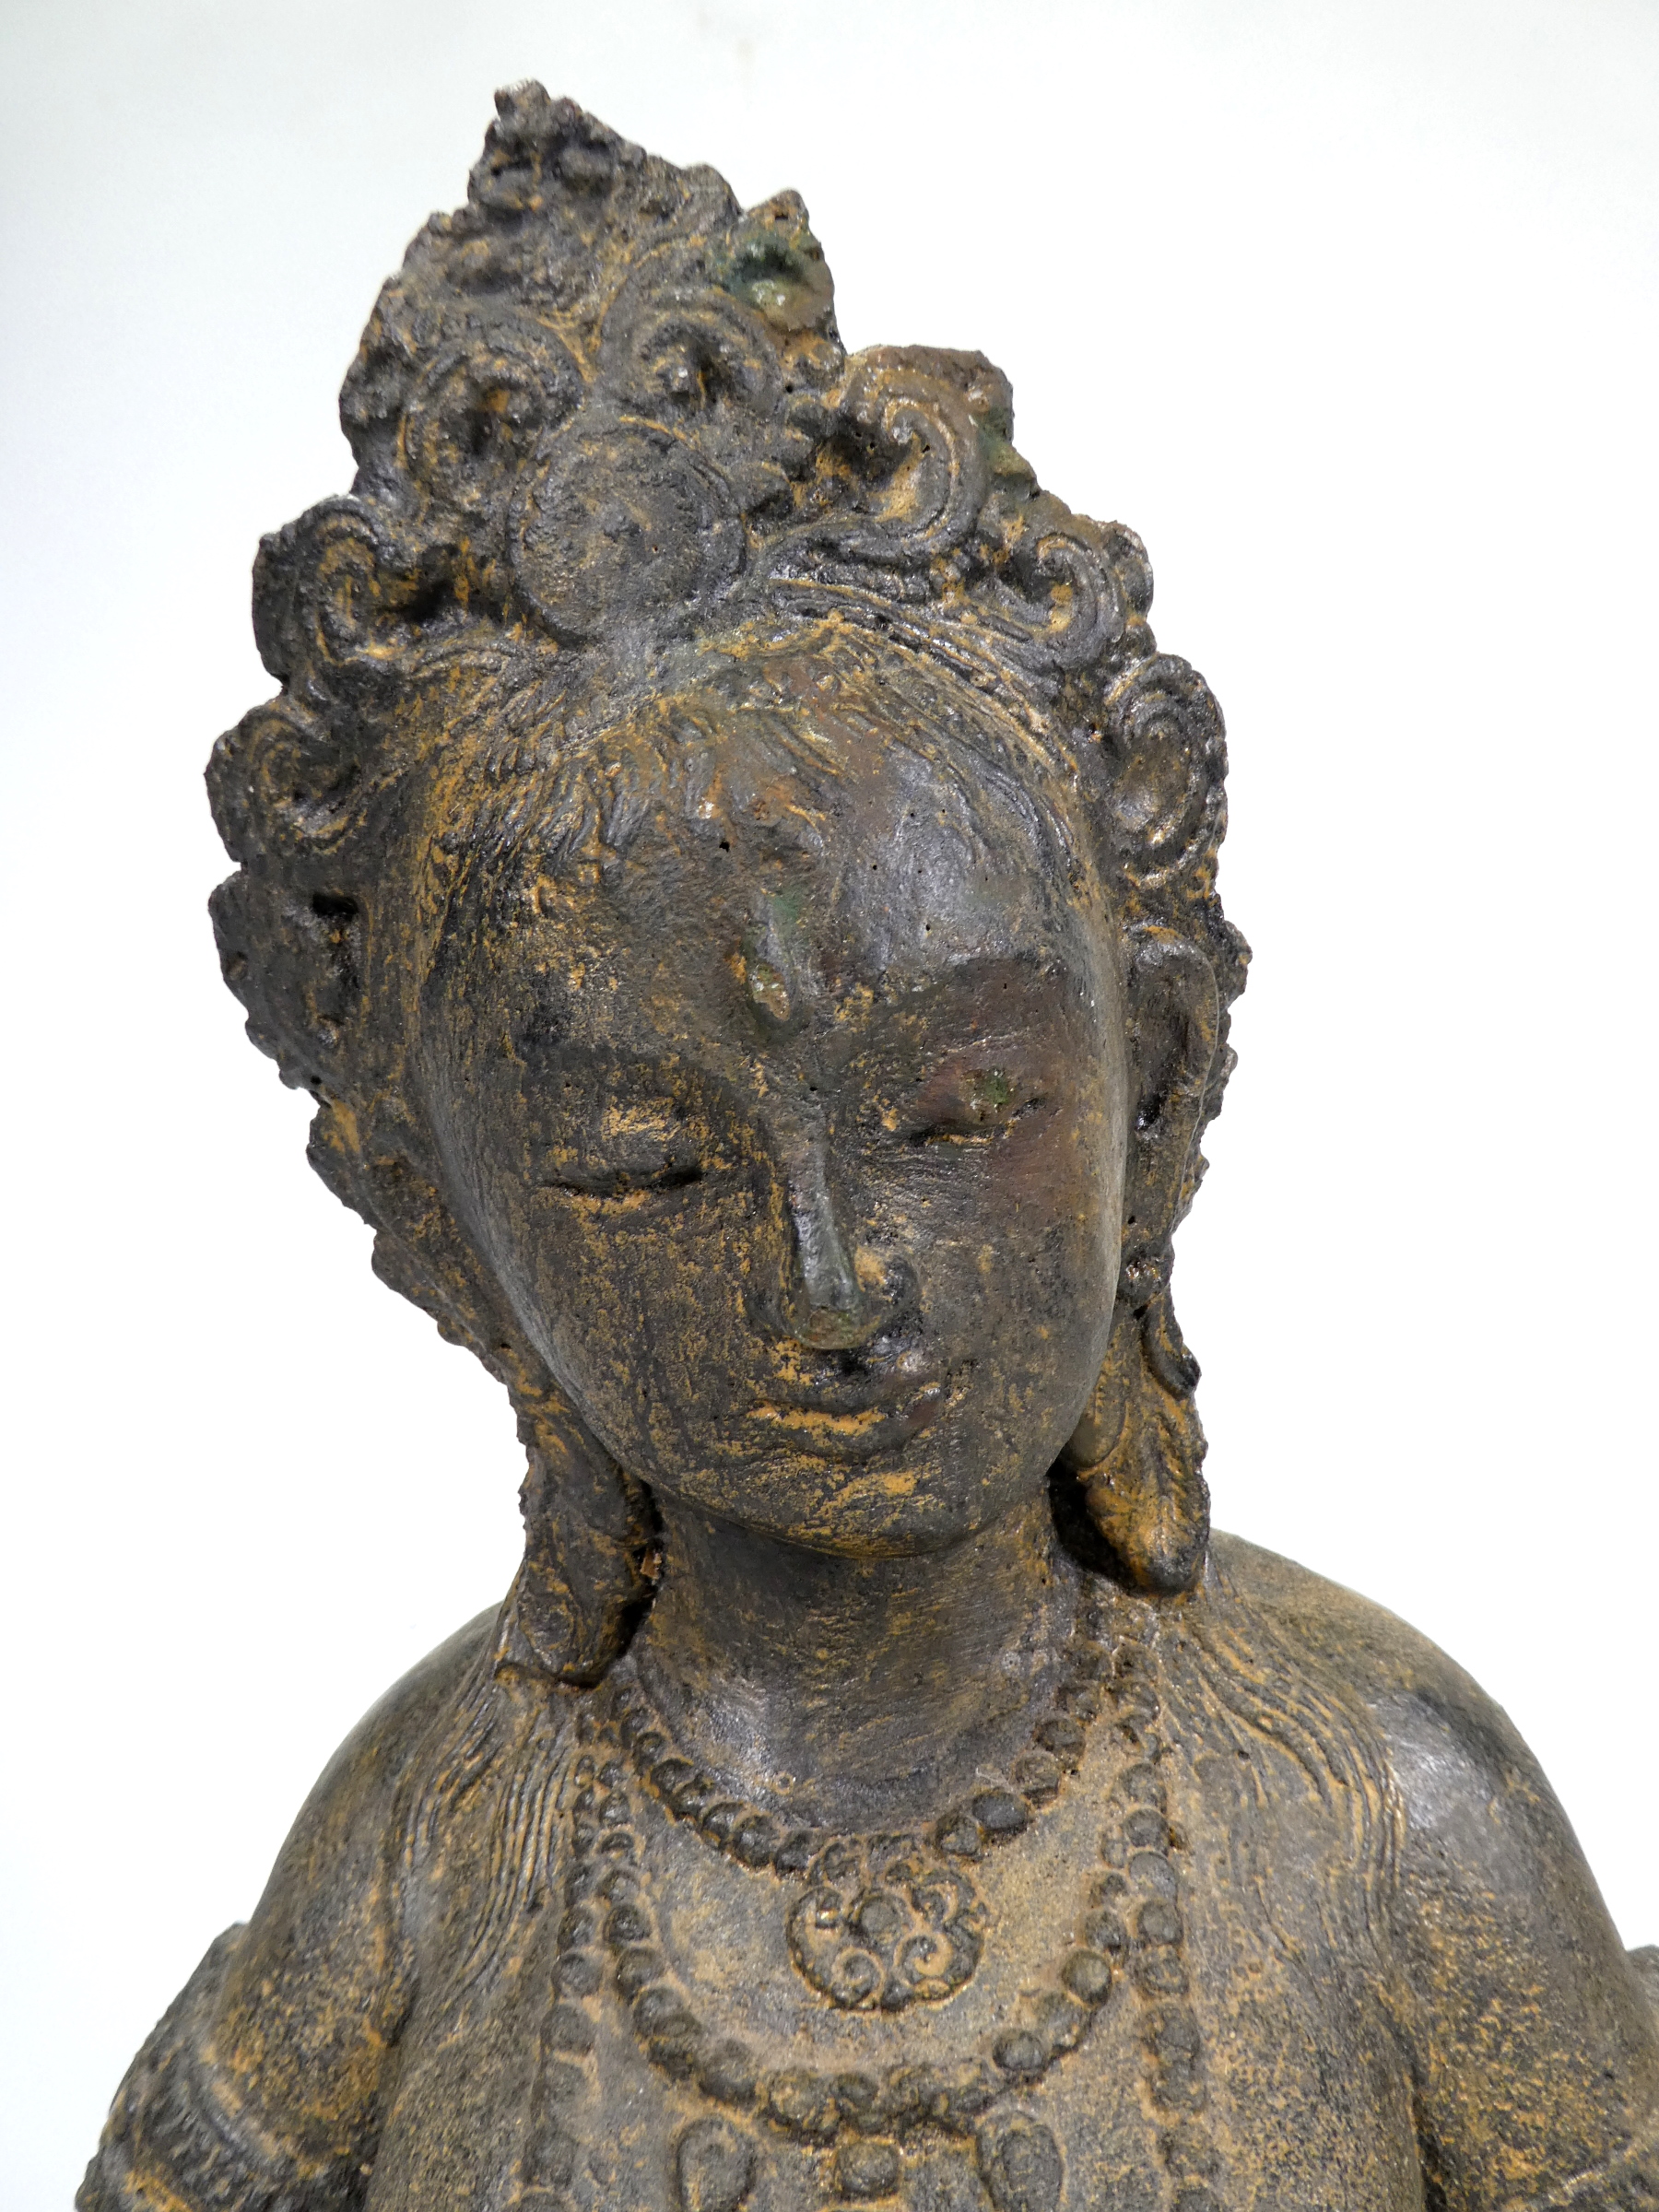 A Balinese deity figure - wearing traditional robes, height 41cm. - Image 2 of 5